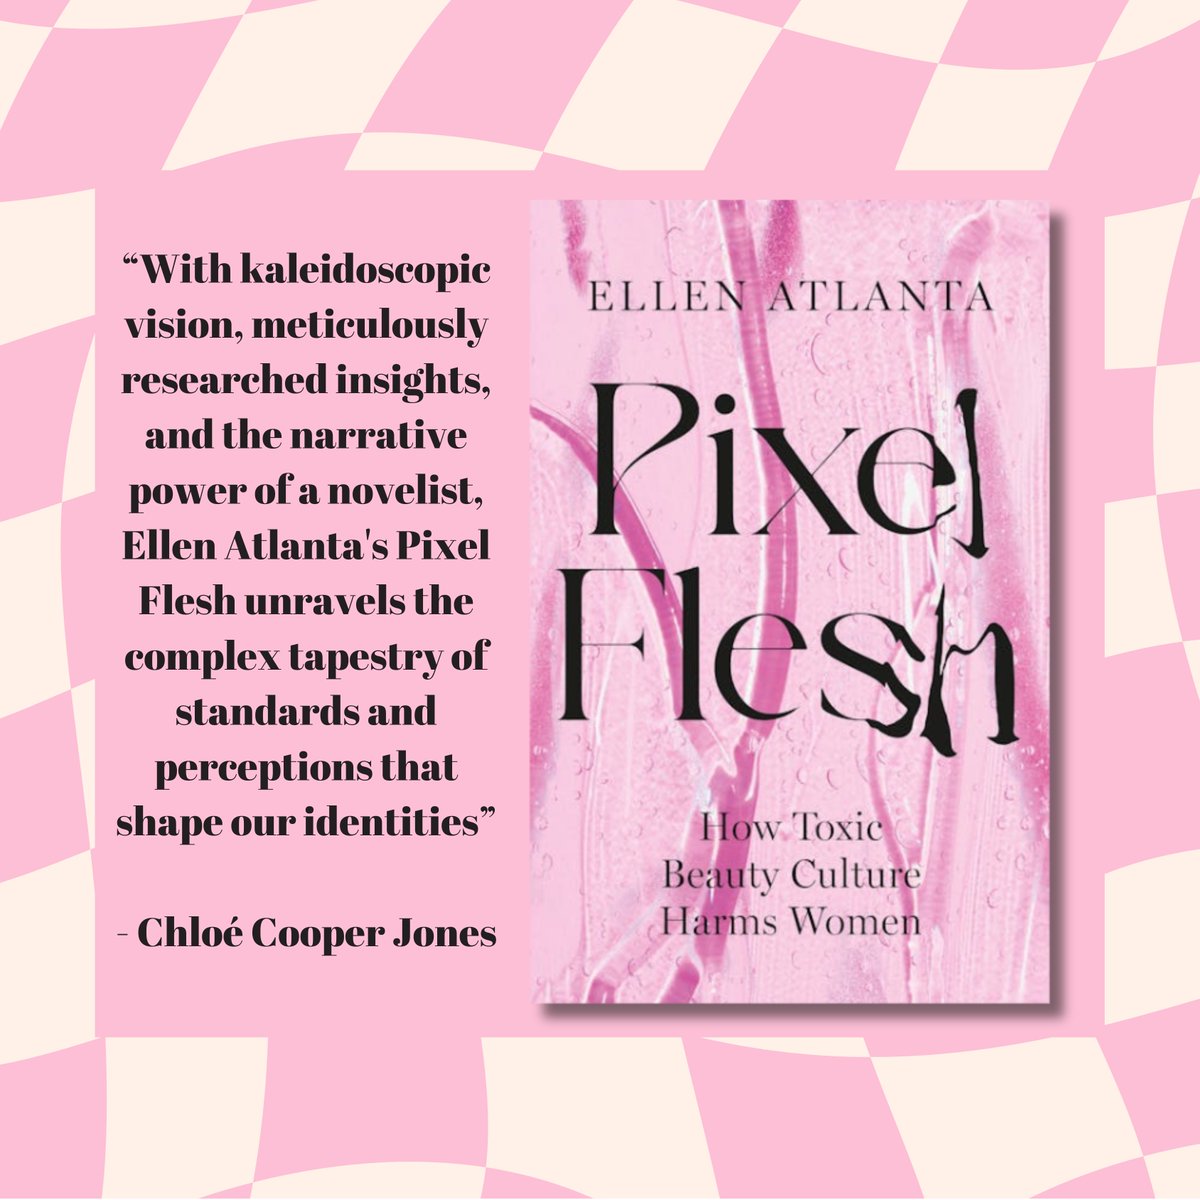 Happy Publication Day to @ellen_atlanta and PIXEL FLESH! Out today in the UK from @headlinepg